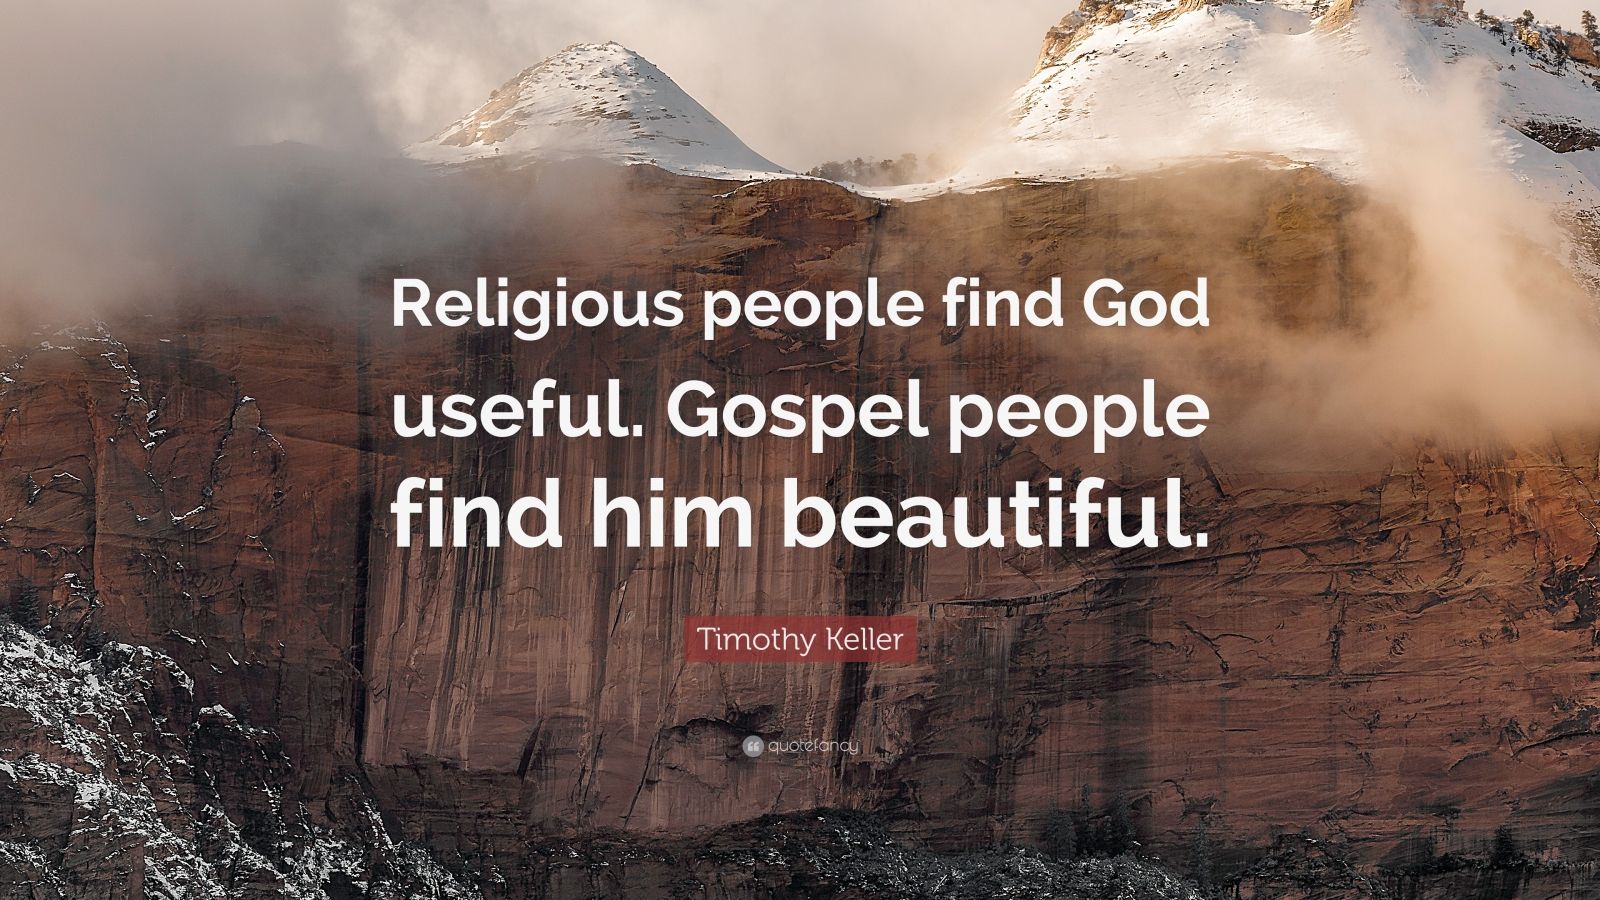 You won't Believe This.. 34+  Reasons for  Beautiful Gospel Quotes! The gospel movies section provides christian movies about the rapture, incarnation, knowing god, god’s name, and more, related to the truths about the second coming of jesus christ.